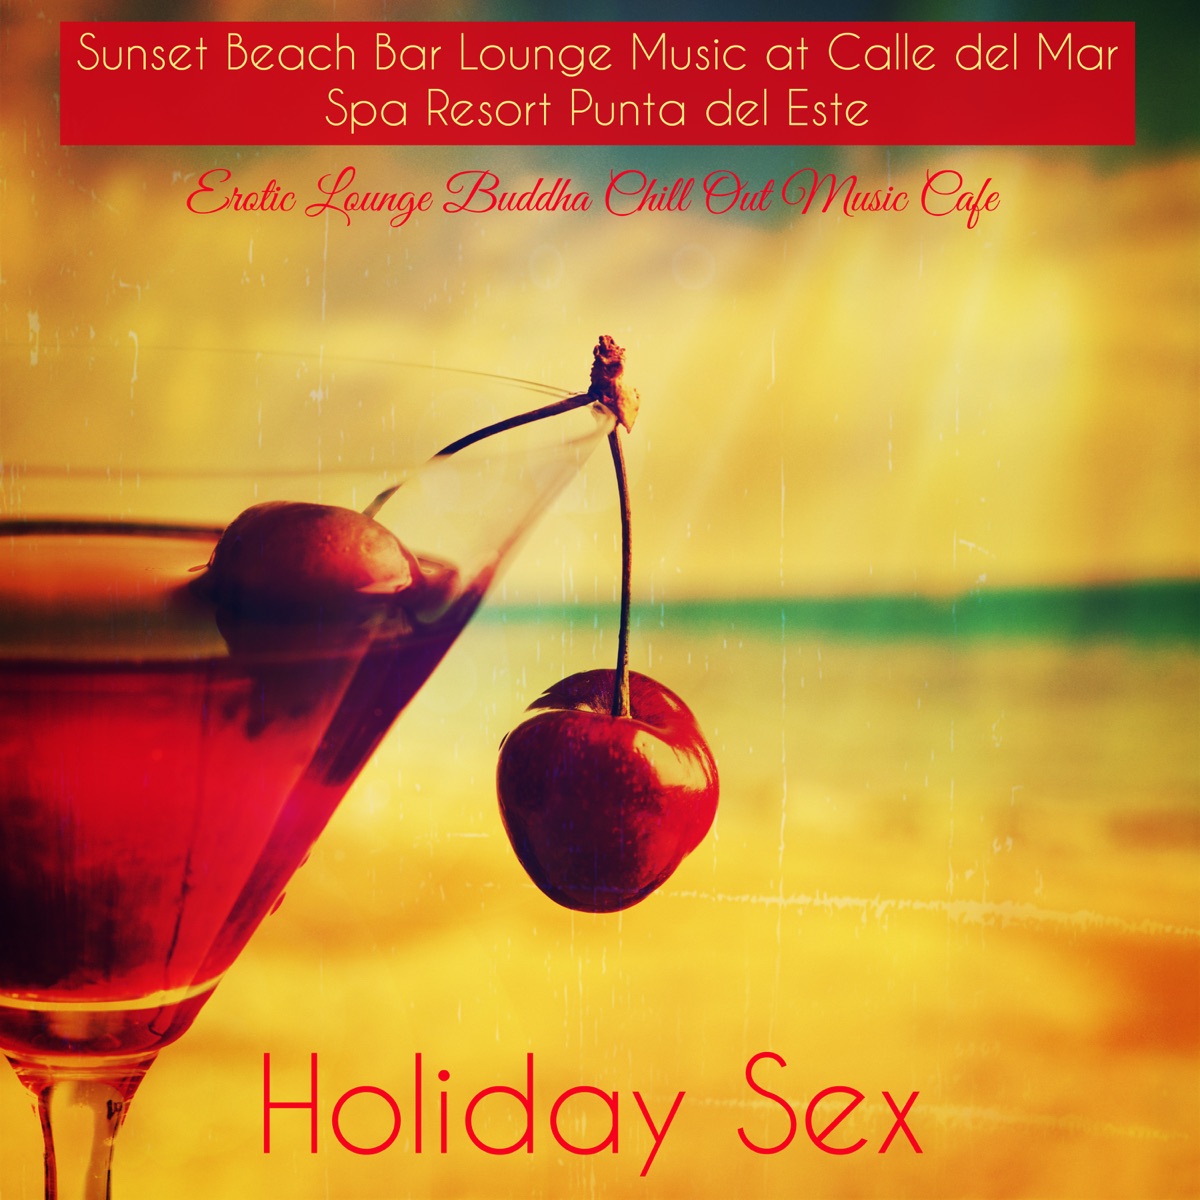 Swingers Club Smooth, Sensual and Erotic Background Music for Swingers Clubs - Album by Erotic Lounge Buddha Chill Out Music Cafe image